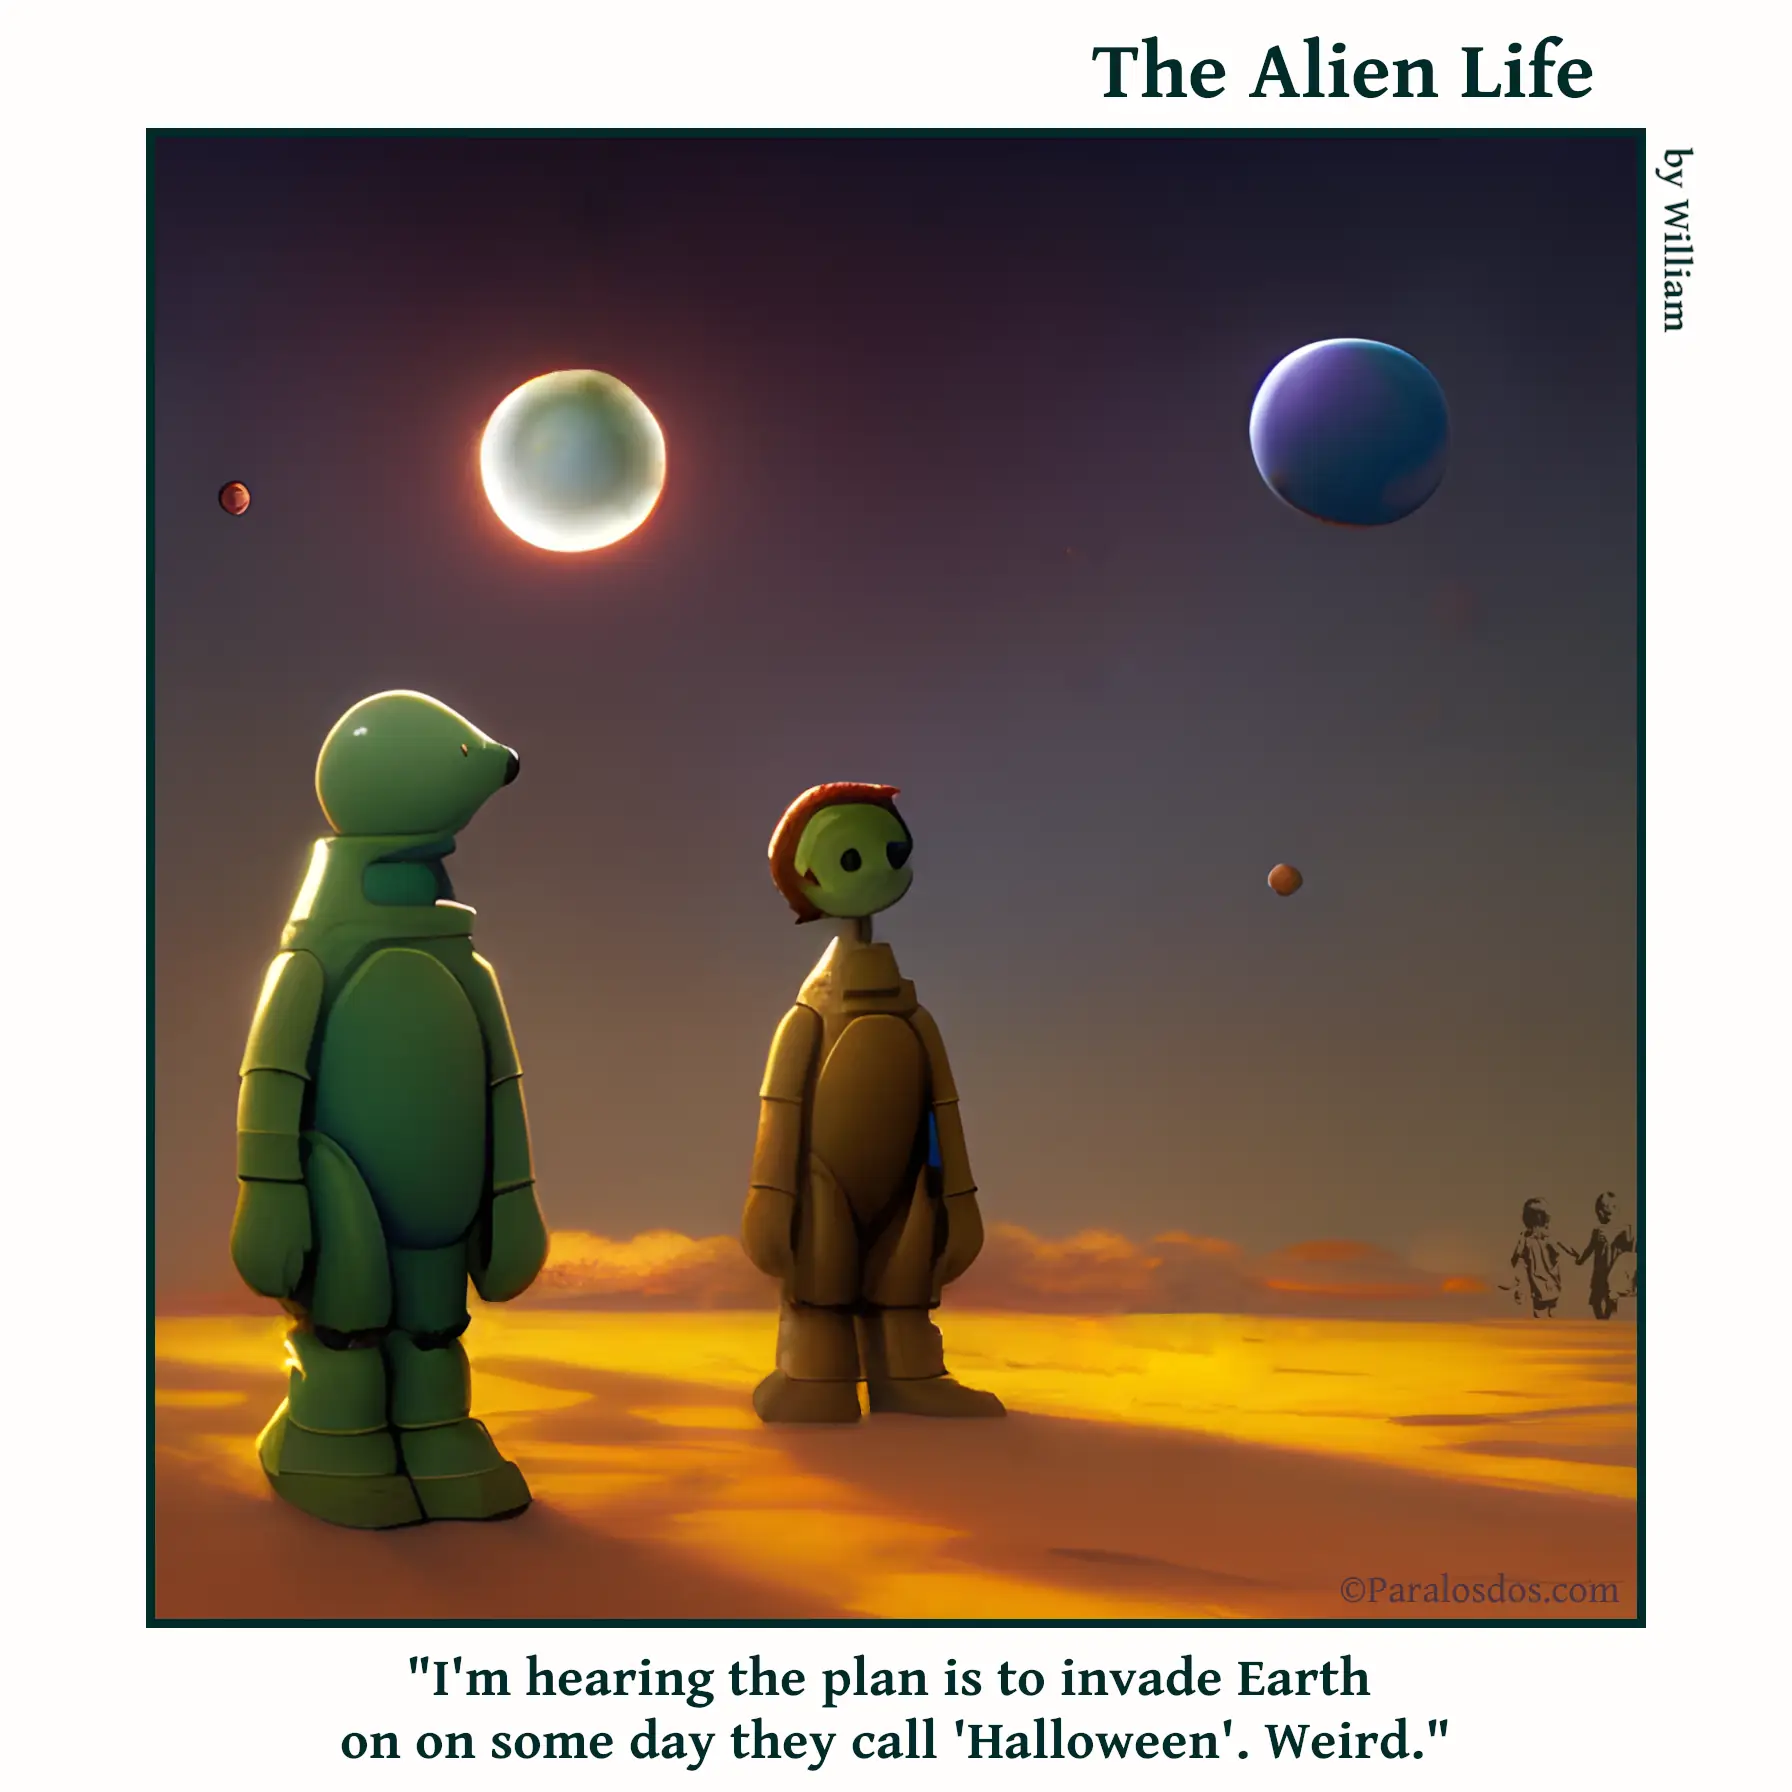 The Alien Life, one panel Comic. Two aliens are hanging out. One looks like a green polar bear in an astronaut costume. The other is wearing a scary hockey goalie mask. The caption reads: "I'm hearing the plan is to invade Earth on on some day they call 'Halloween'. Weird."